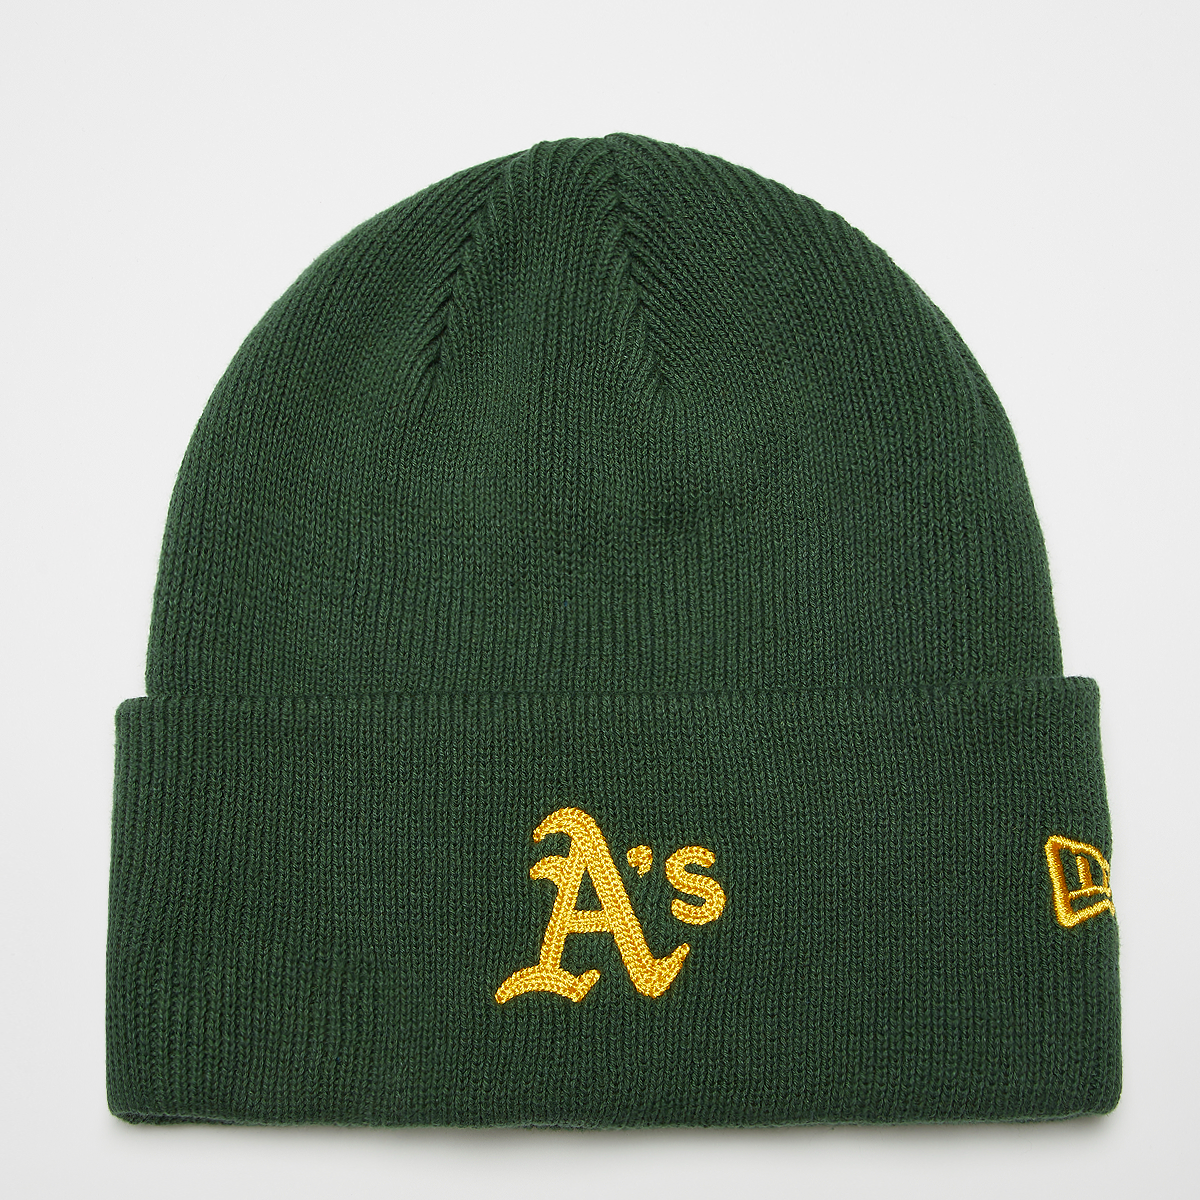 new era beanie raised from concrete mlb oakland athletics, bonnets, accessoires, dk grn/gld, taille: one size, tailles disponibles:one size